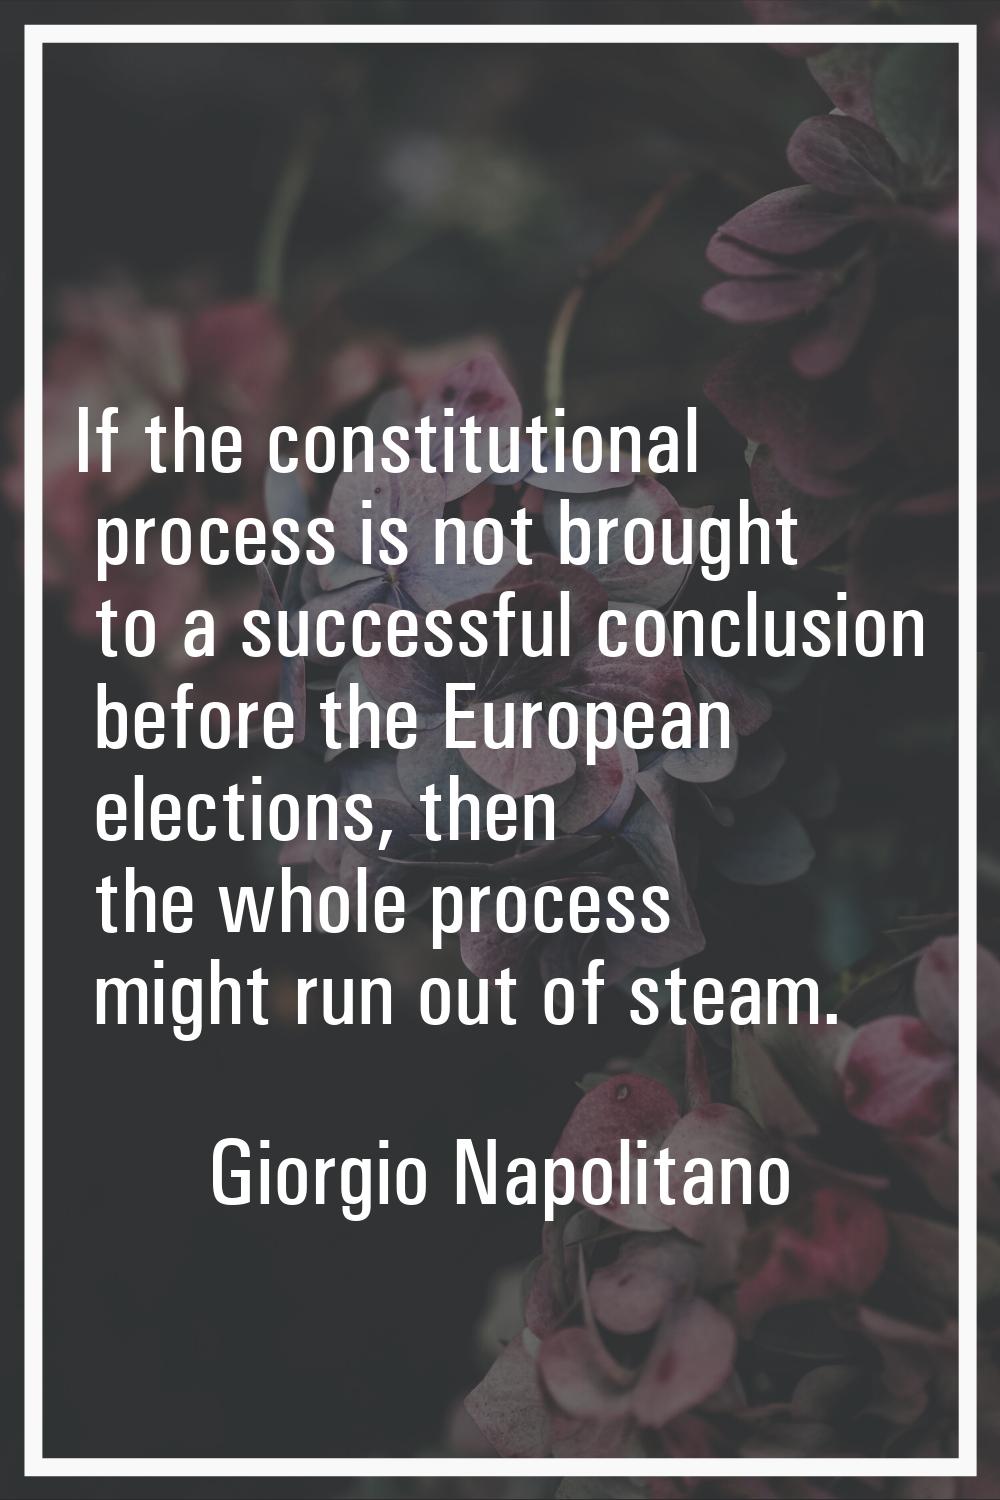 If the constitutional process is not brought to a successful conclusion before the European electio